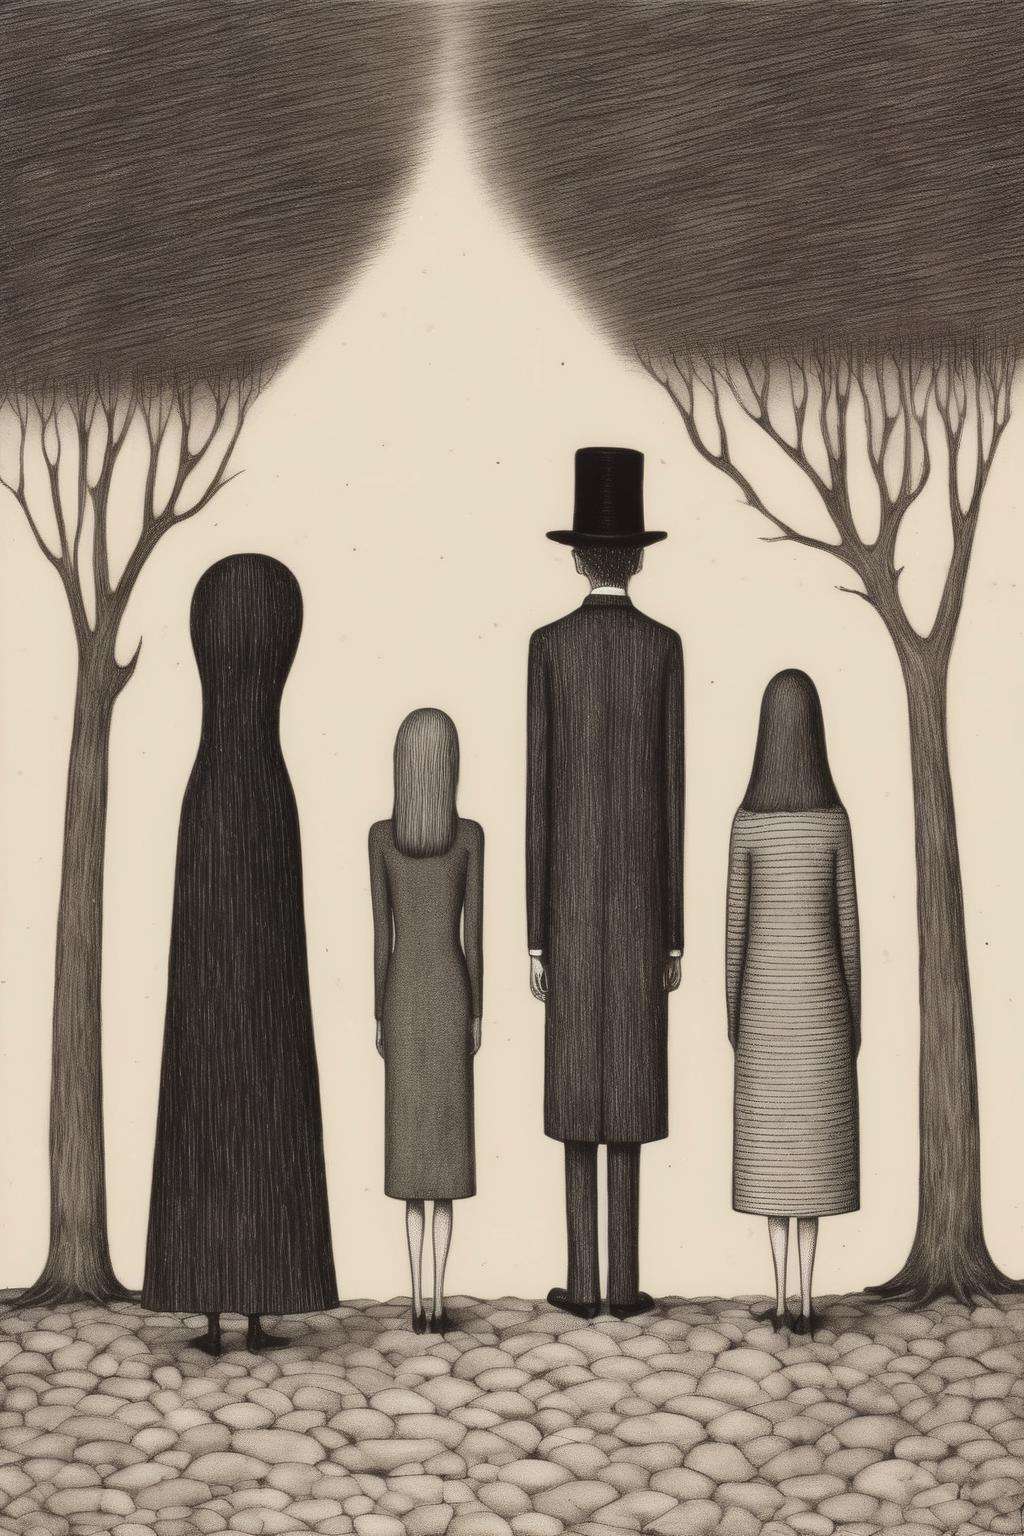 <lora:Edward Gorey Style:1>Edward Gorey Style - two women and a man looking for a missing person